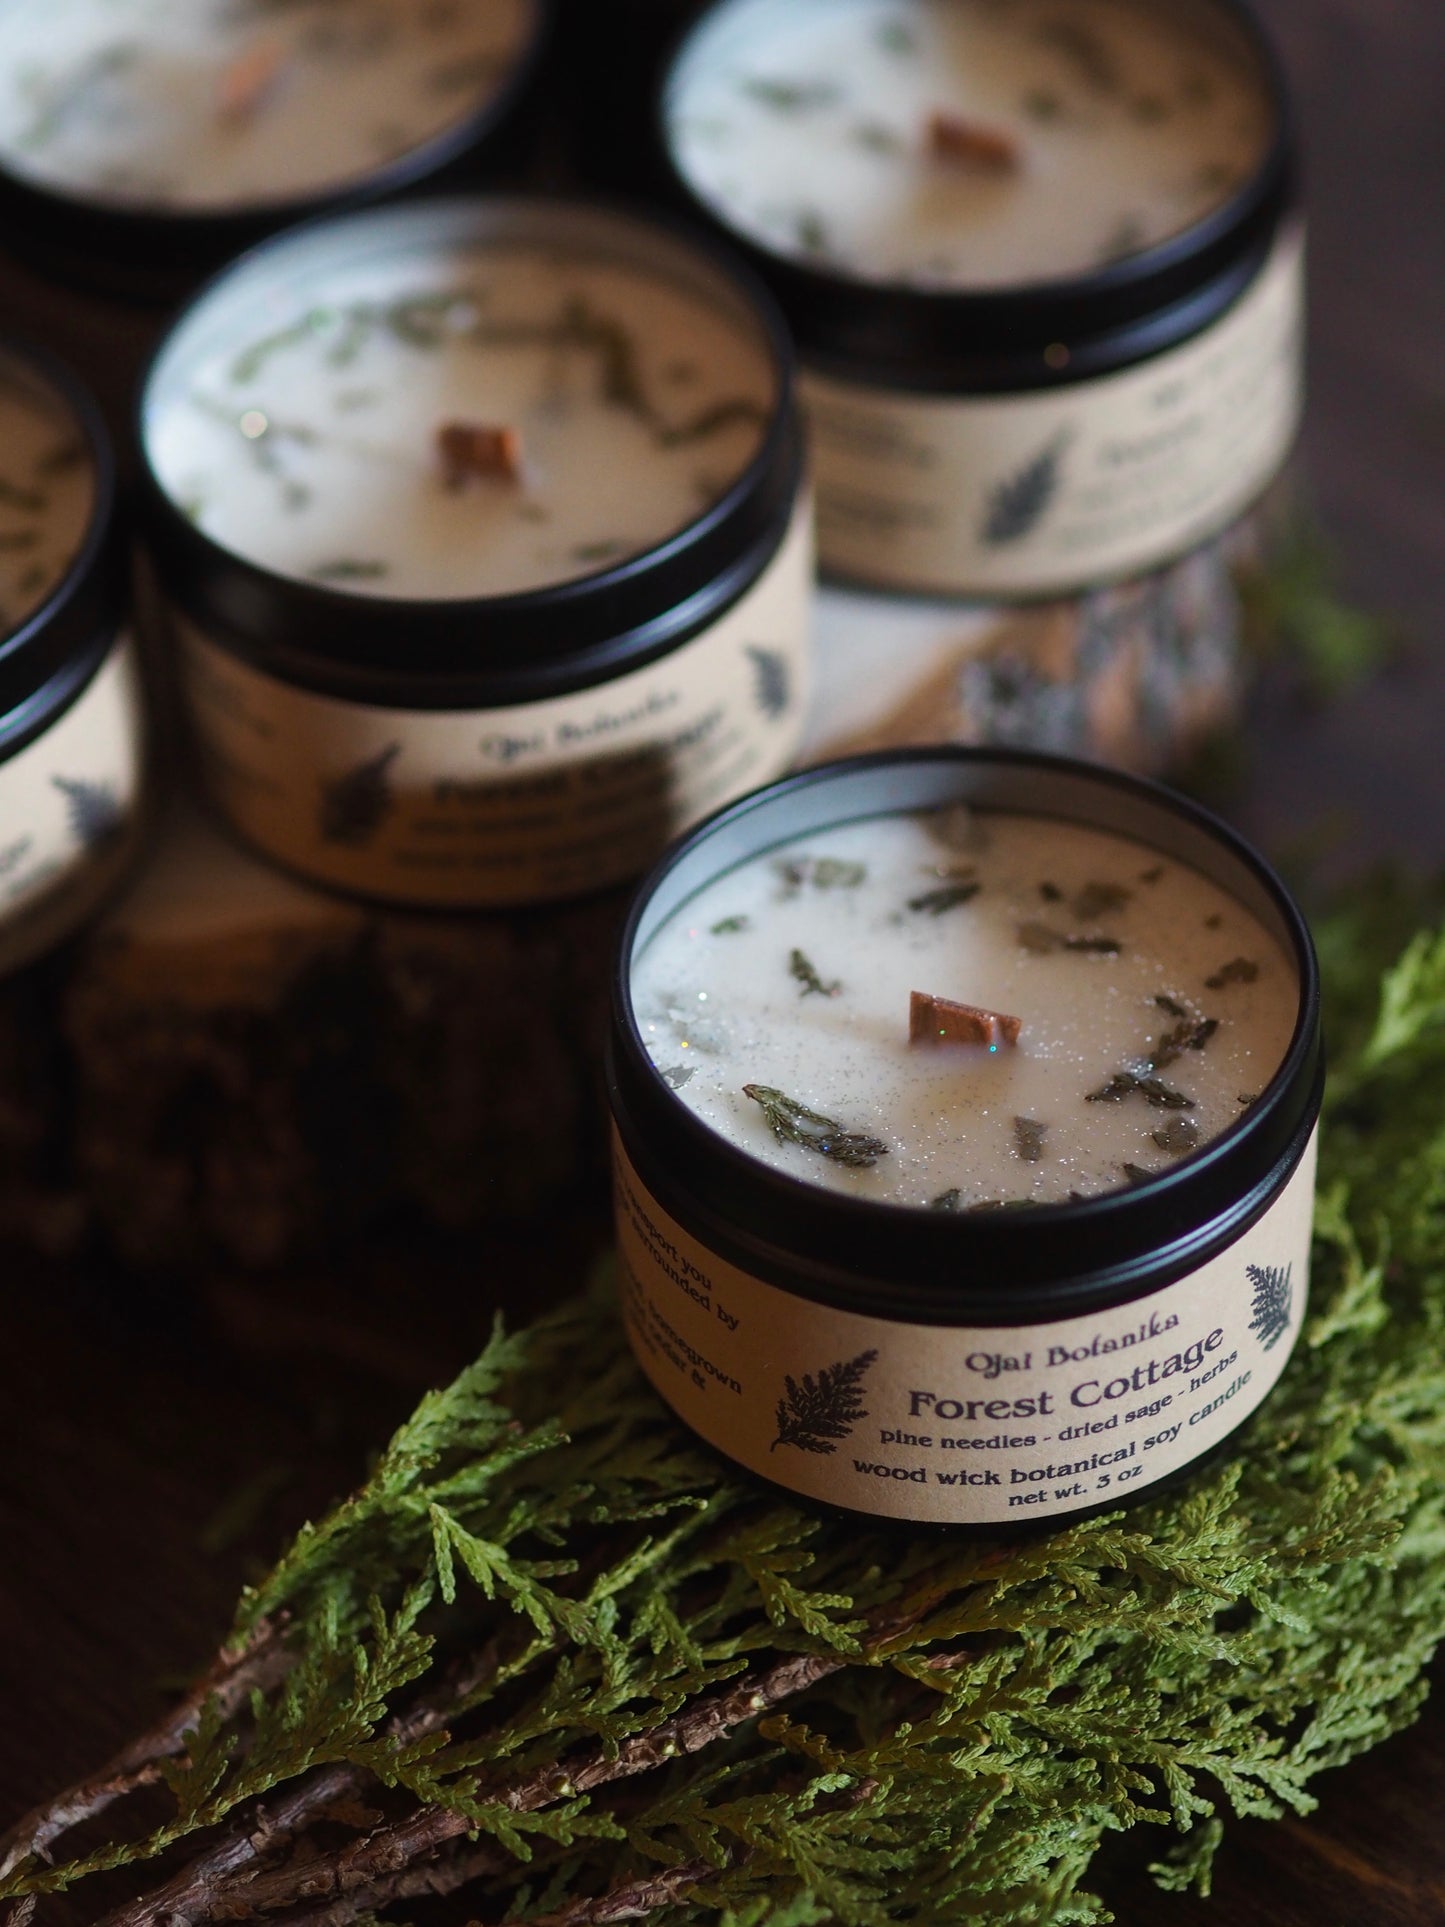 Forest Cottage - Pine Needle & Sage - Wood Wick Soy Candle - Limited Edition